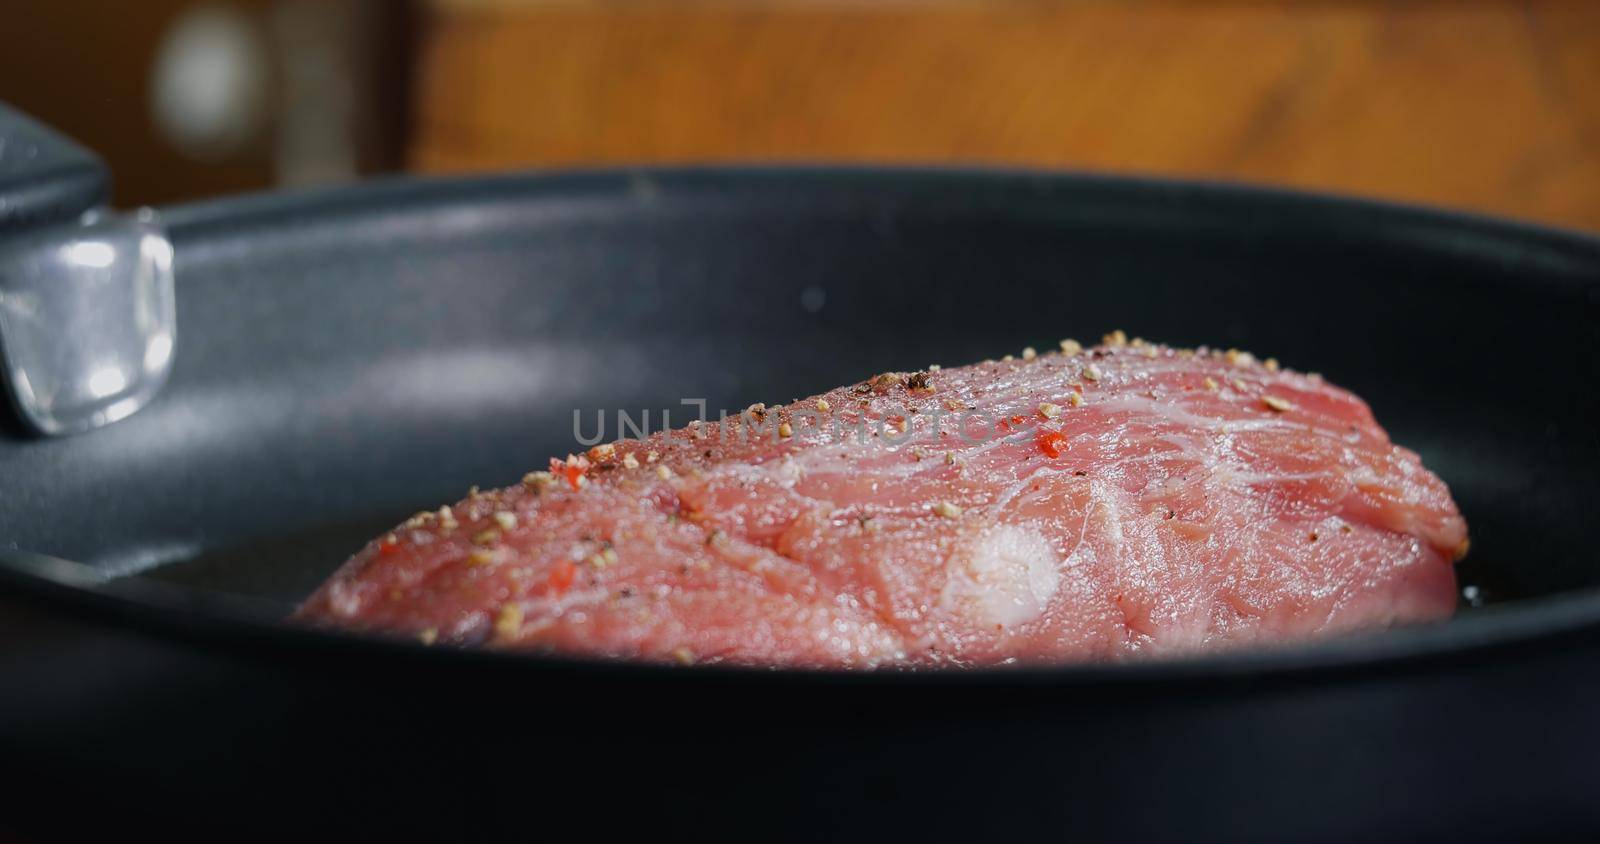 Pork Meat Seasoned is Frying in Hot Pan. Cooking Professional Delicious Meat.